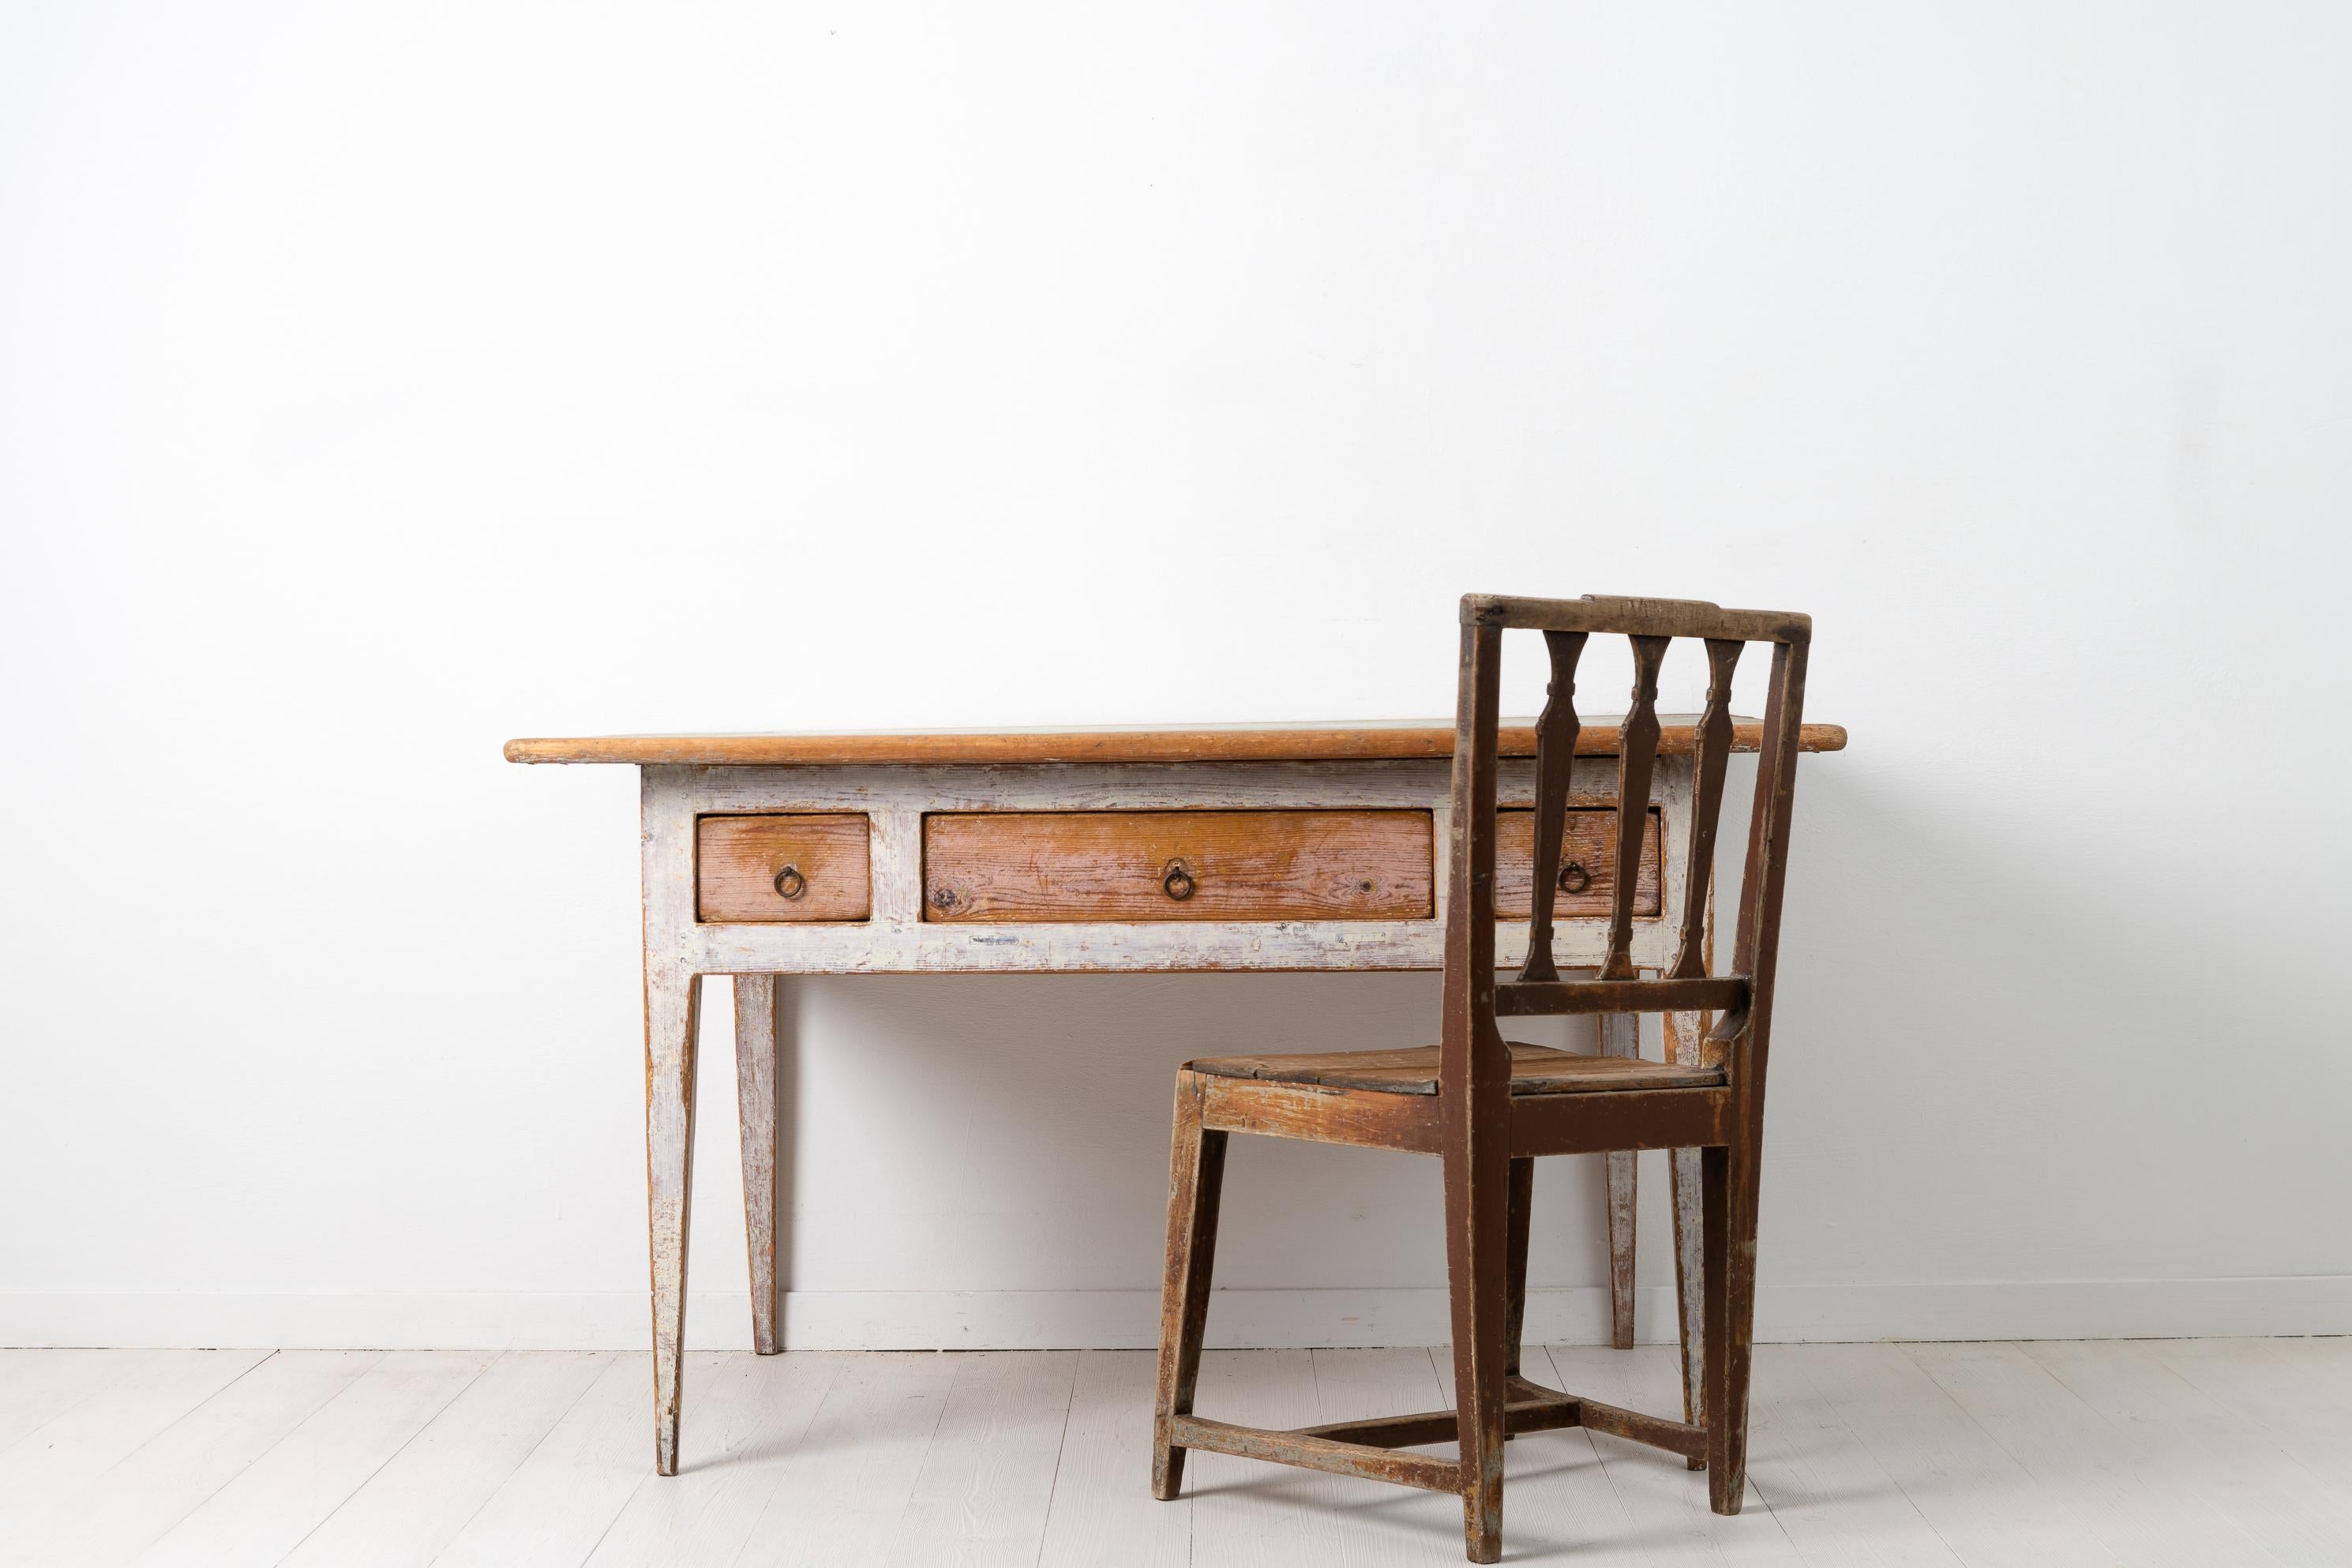 Gustavian Provincial country table from the first few years of the 19th century, between 1800 and 1810. The table is from northern Sweden and a provincial work in painted pine with 3 drawers and straight tapered legs. It has the original light paint